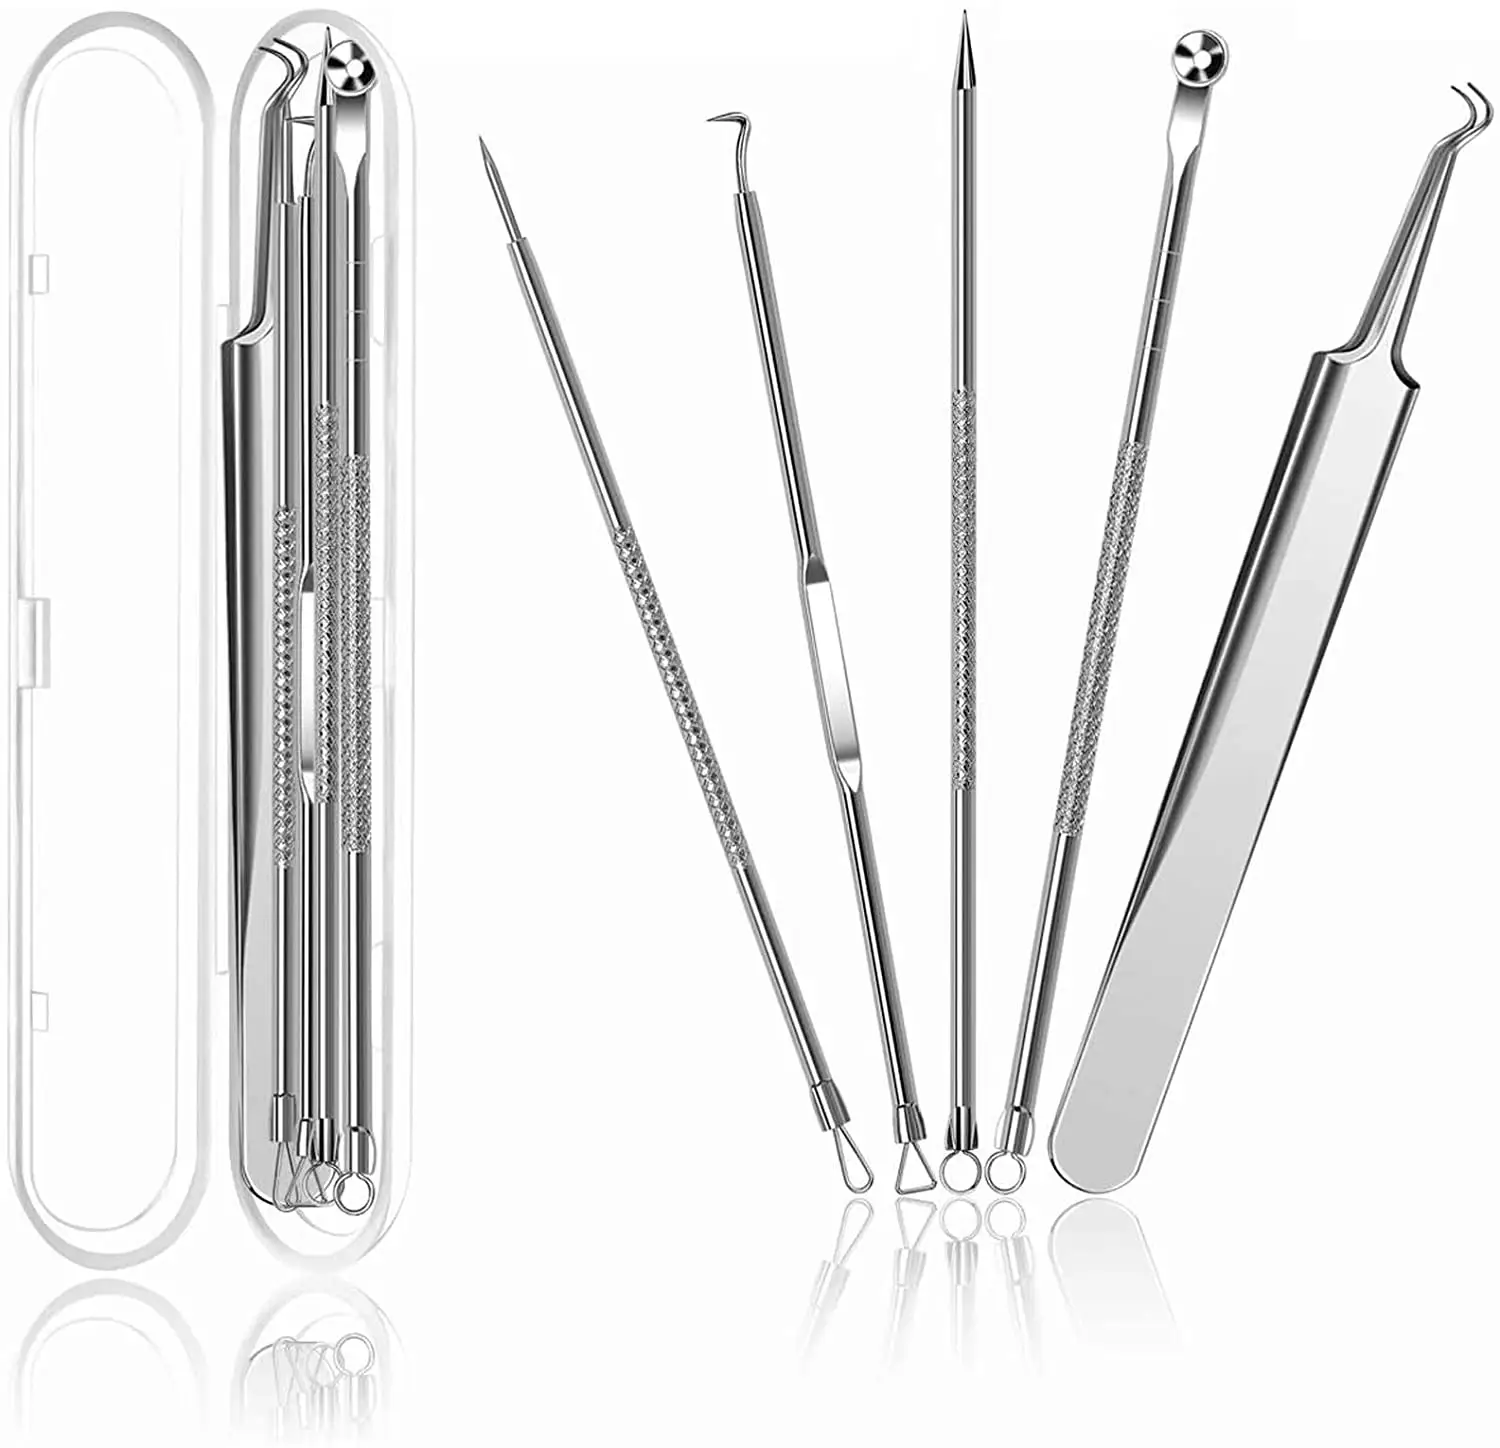 5 pcs stainless steel Blackhead Removers Whitehead Pimple Spot Comedone Acne Extractor Popper Tools Kit